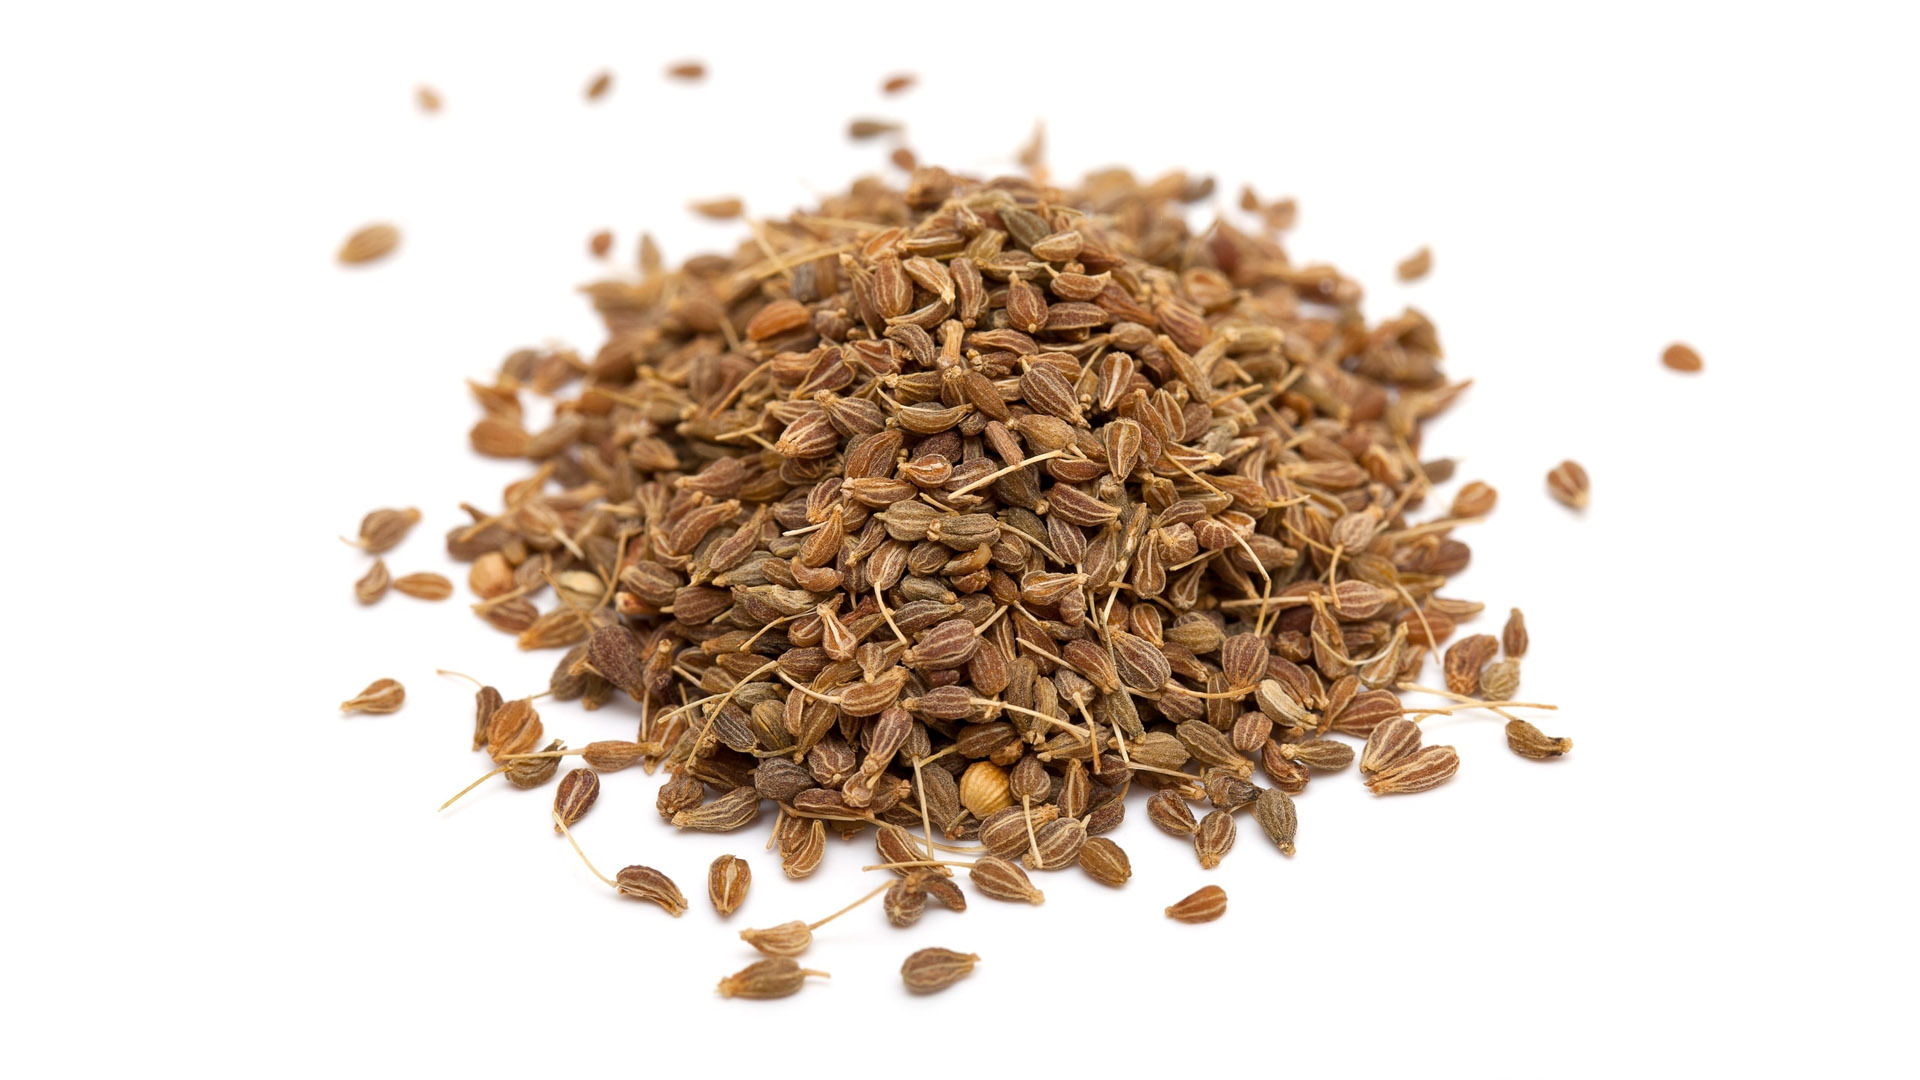 Anise seeds can help relieve colic in children when prepared as a warm drink (MEE)